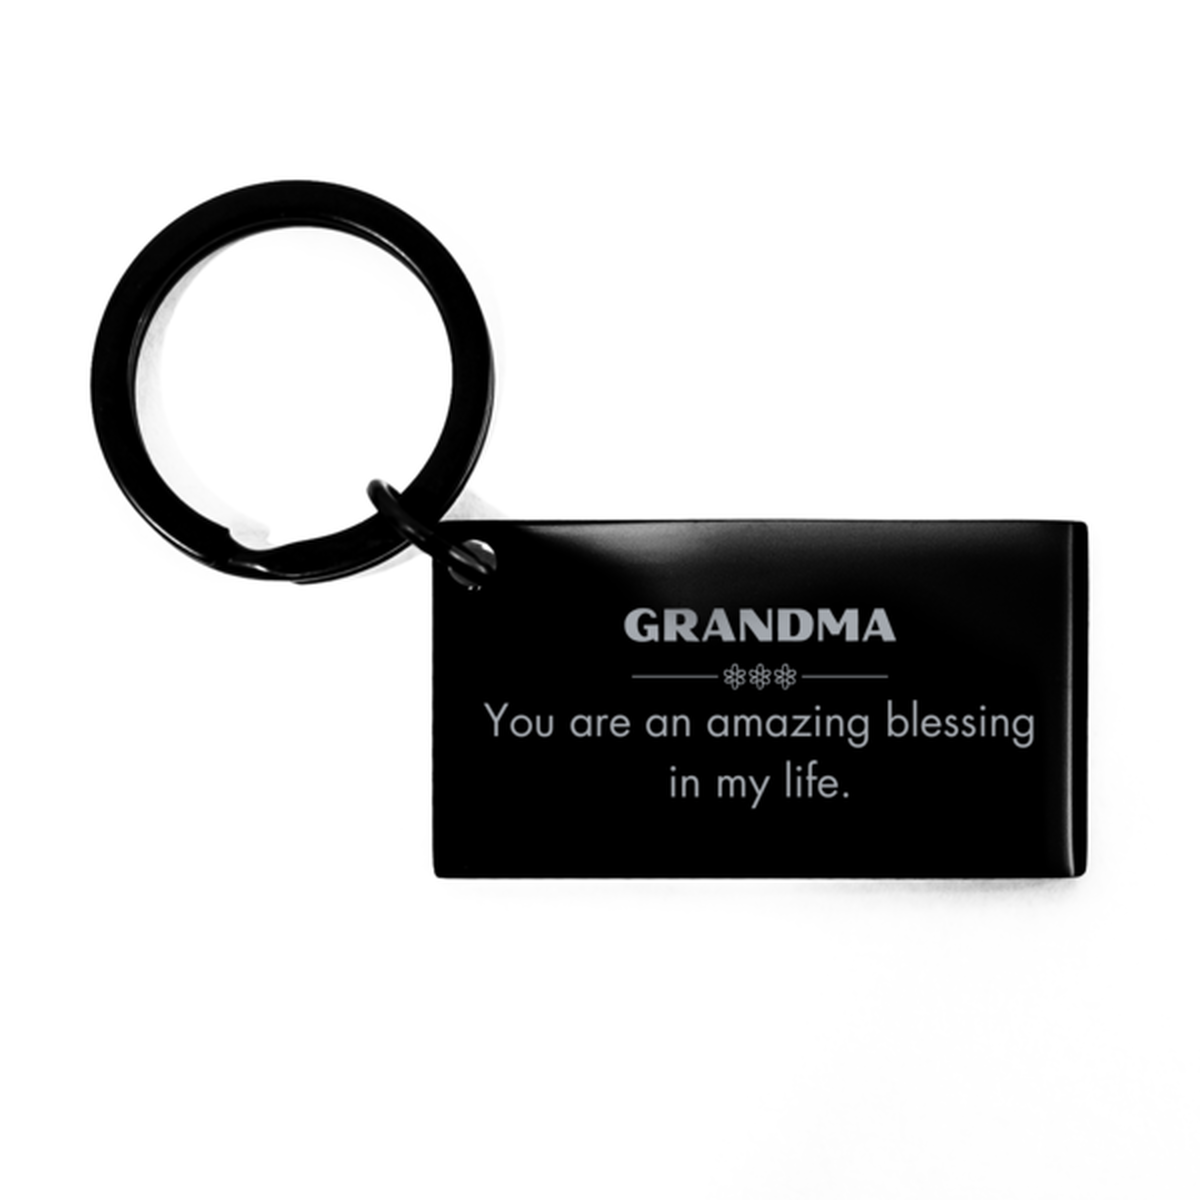 Grandma Keychain, You are an amazing blessing in my life, Thank You Gifts For Grandma, Inspirational Birthday Christmas Unique Gifts For Grandma